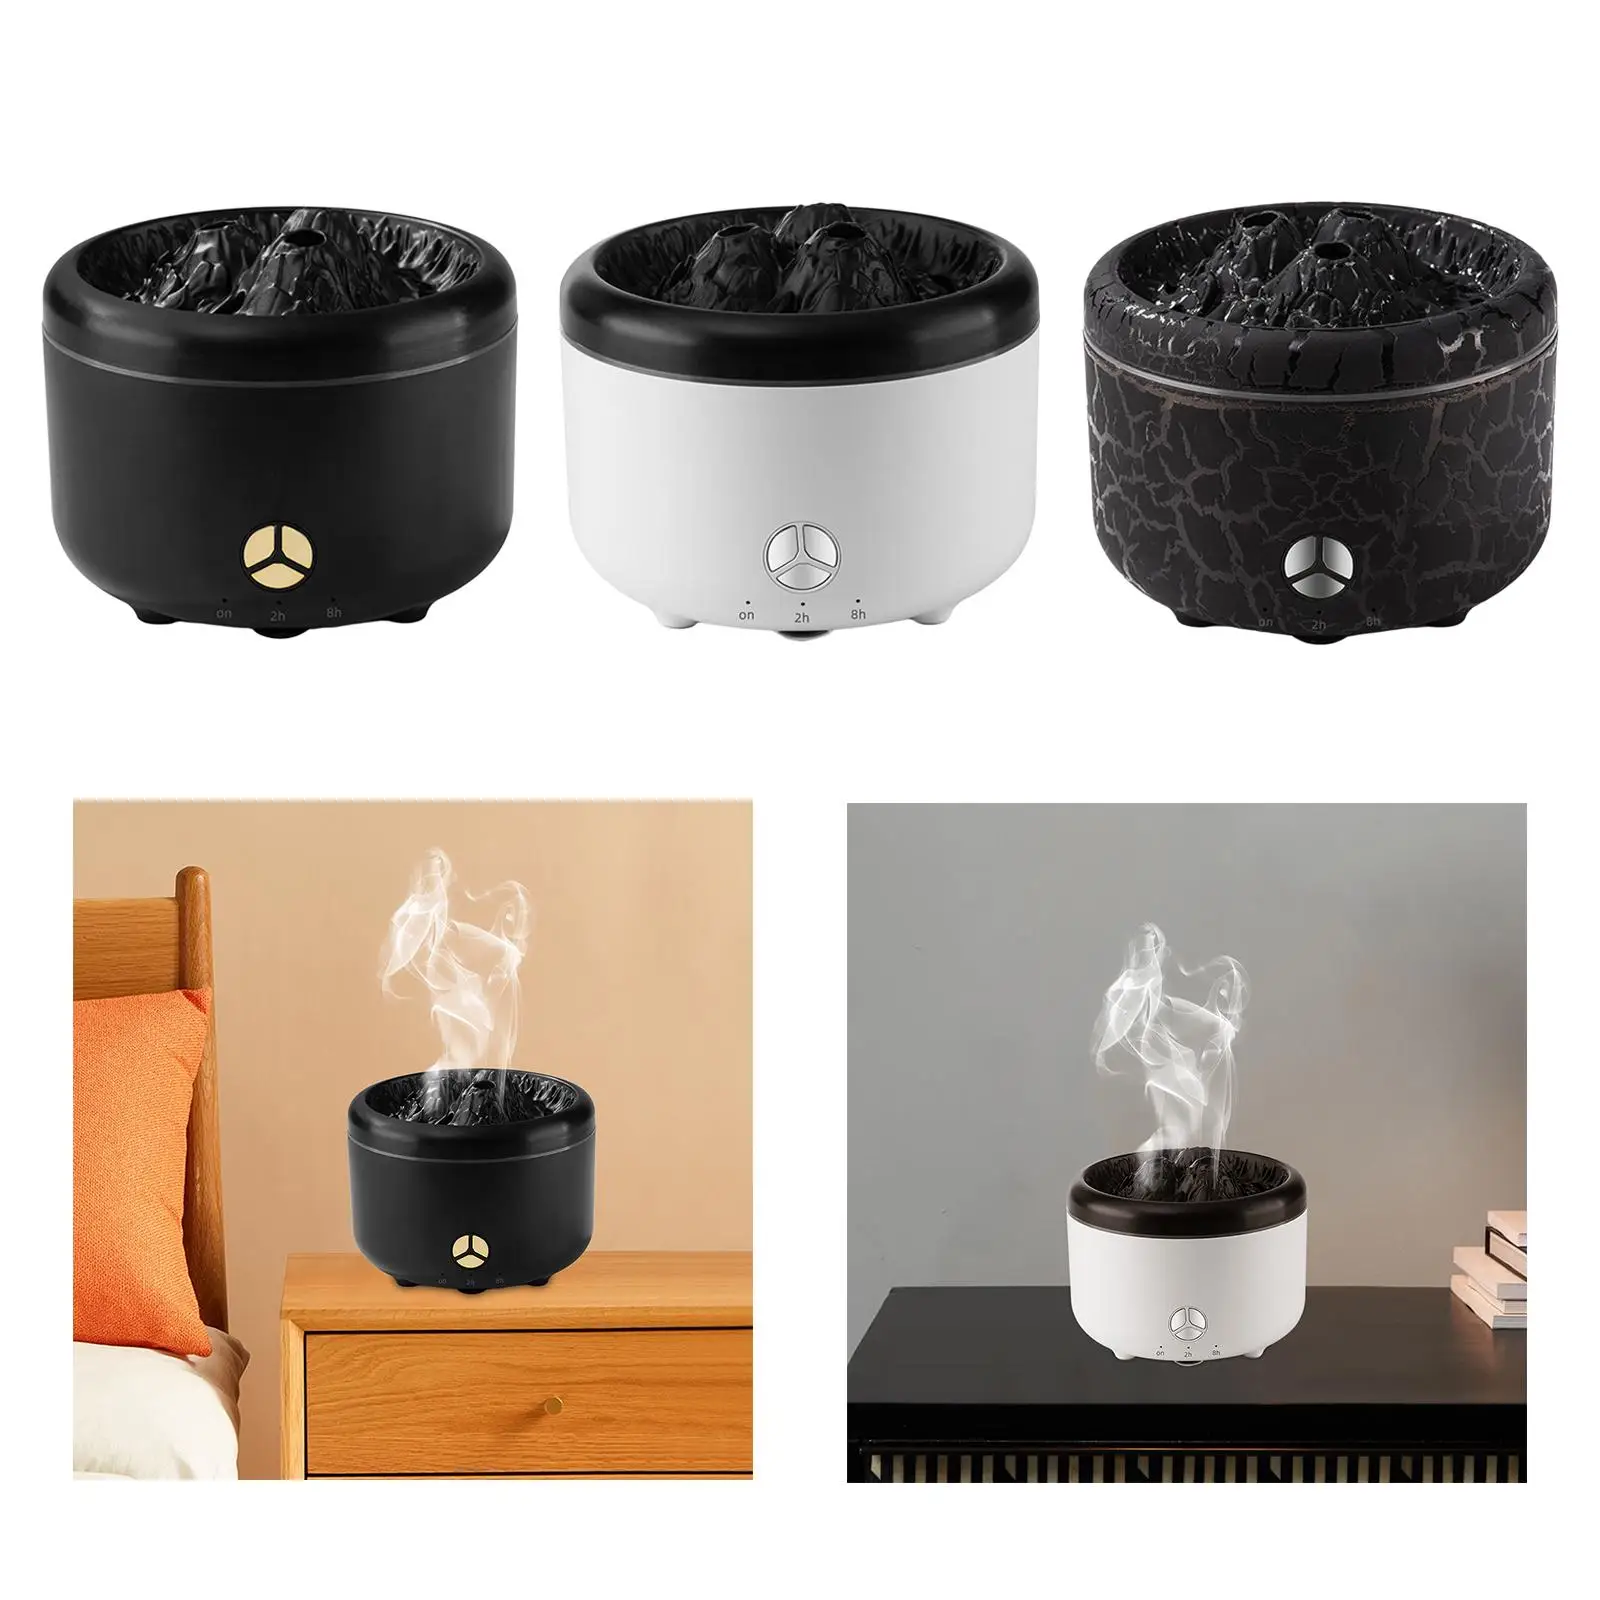 Flame Aromatherapy Humidifier 2 Flame Light Colors 2 Spray Modes Lightweight Aroma Diffuser for Office Bedroom Indoor Yoga Desk